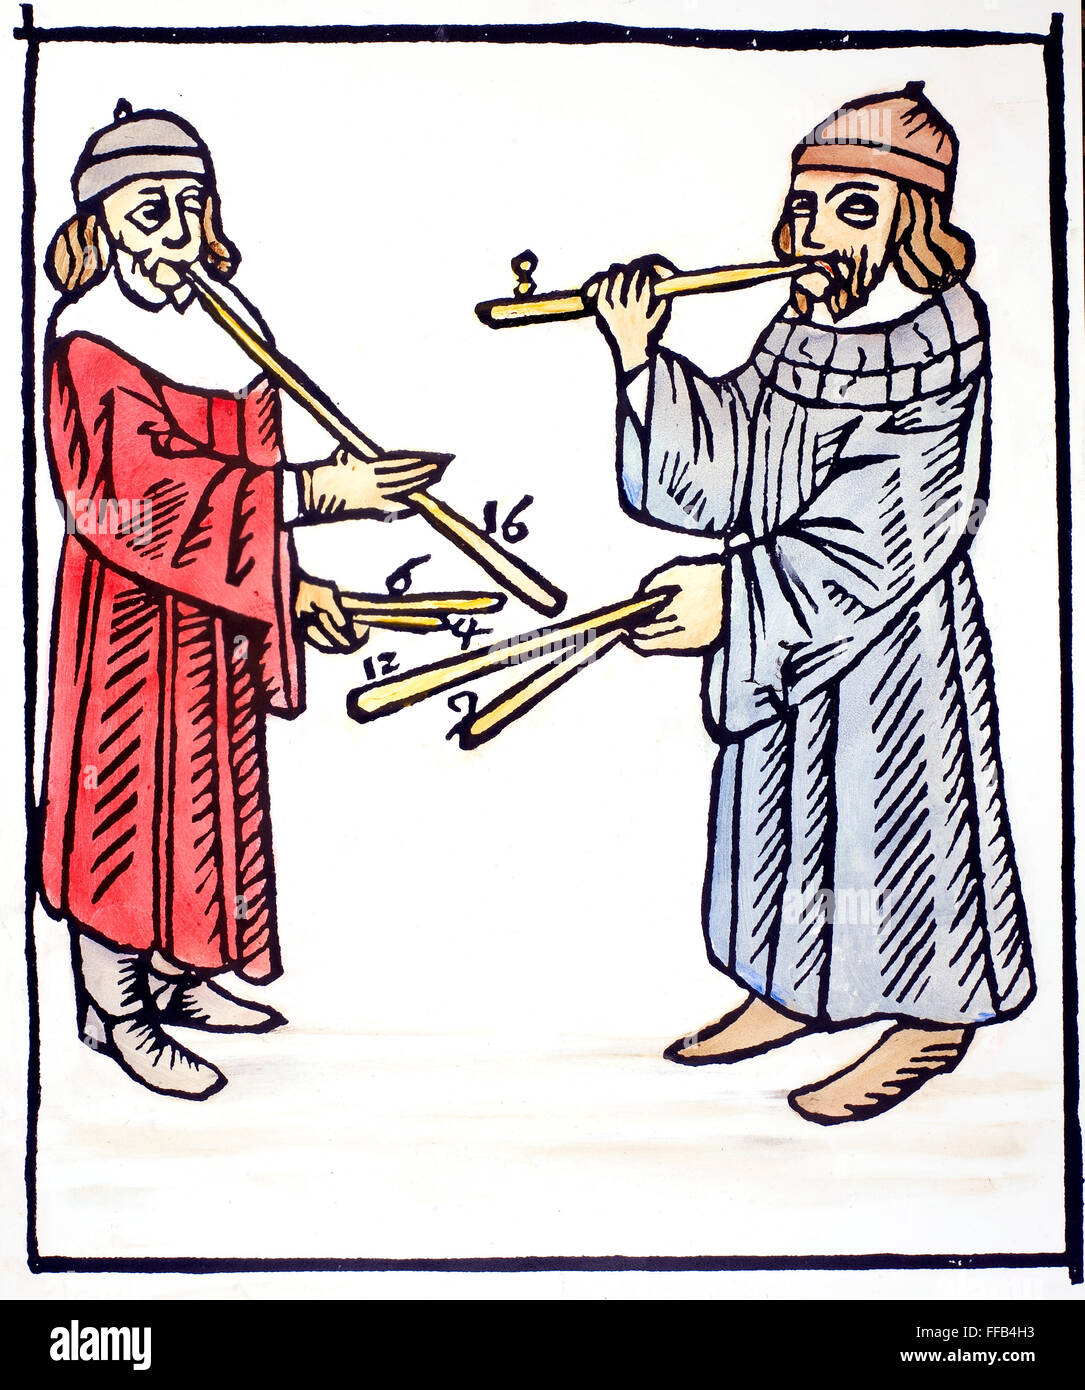 PIPERS, 1492. /nWoodcut from 'Theorica Musicae' by Franchinus Gaffurius. Milan, 1492. Stock Photo